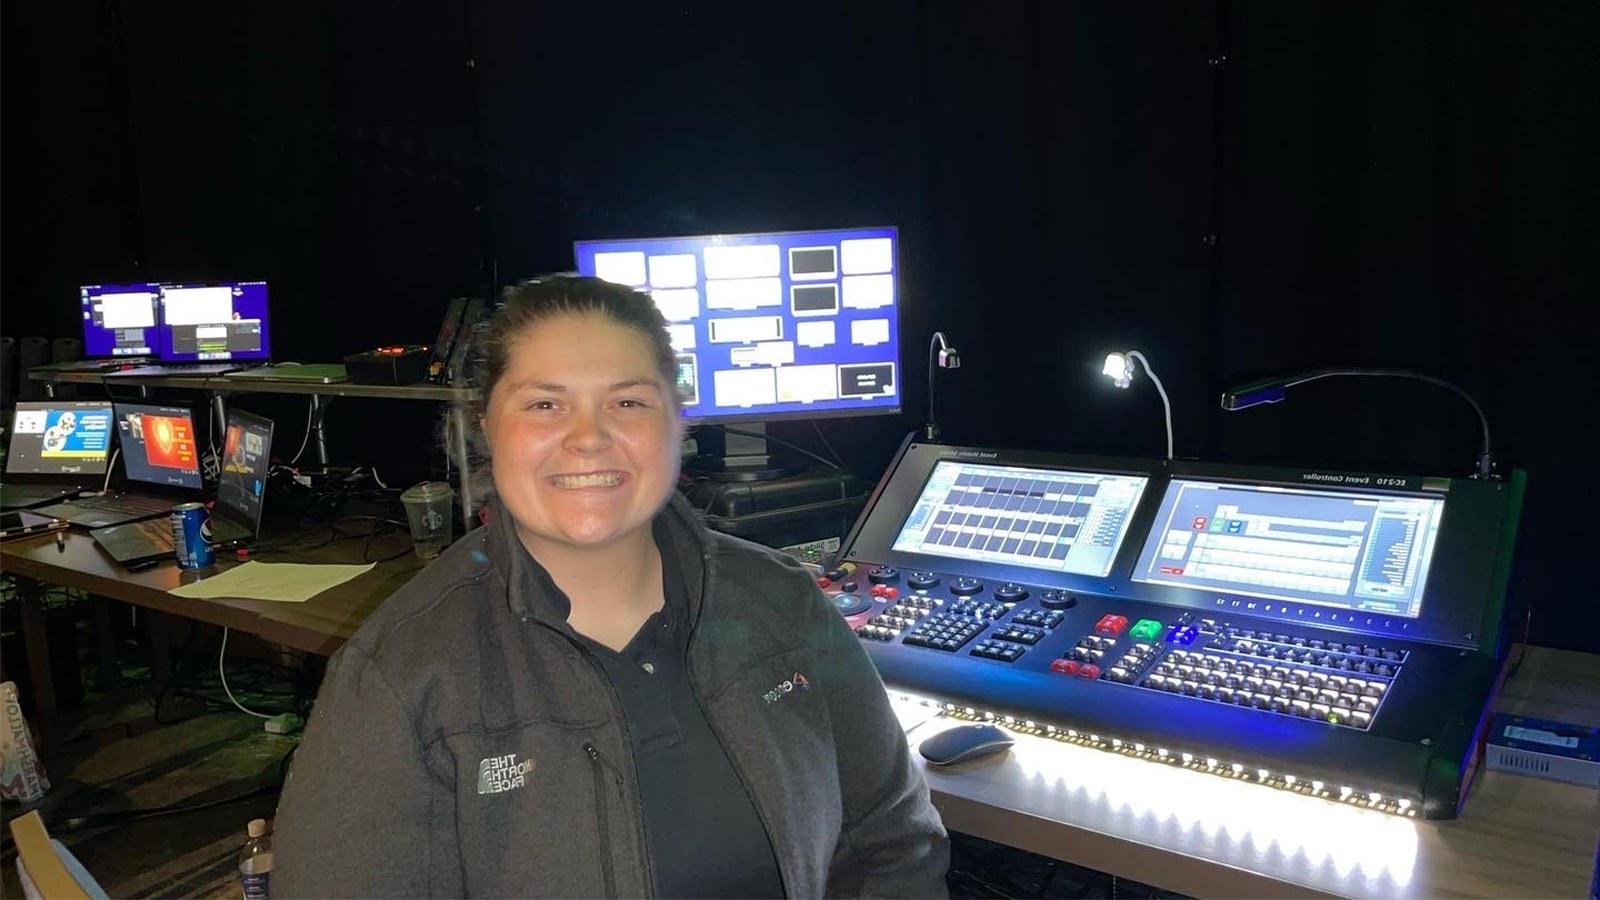 Jean Fuemmeler sits in front of live event video production controllers. She is wearing a gray jacket and smiling.